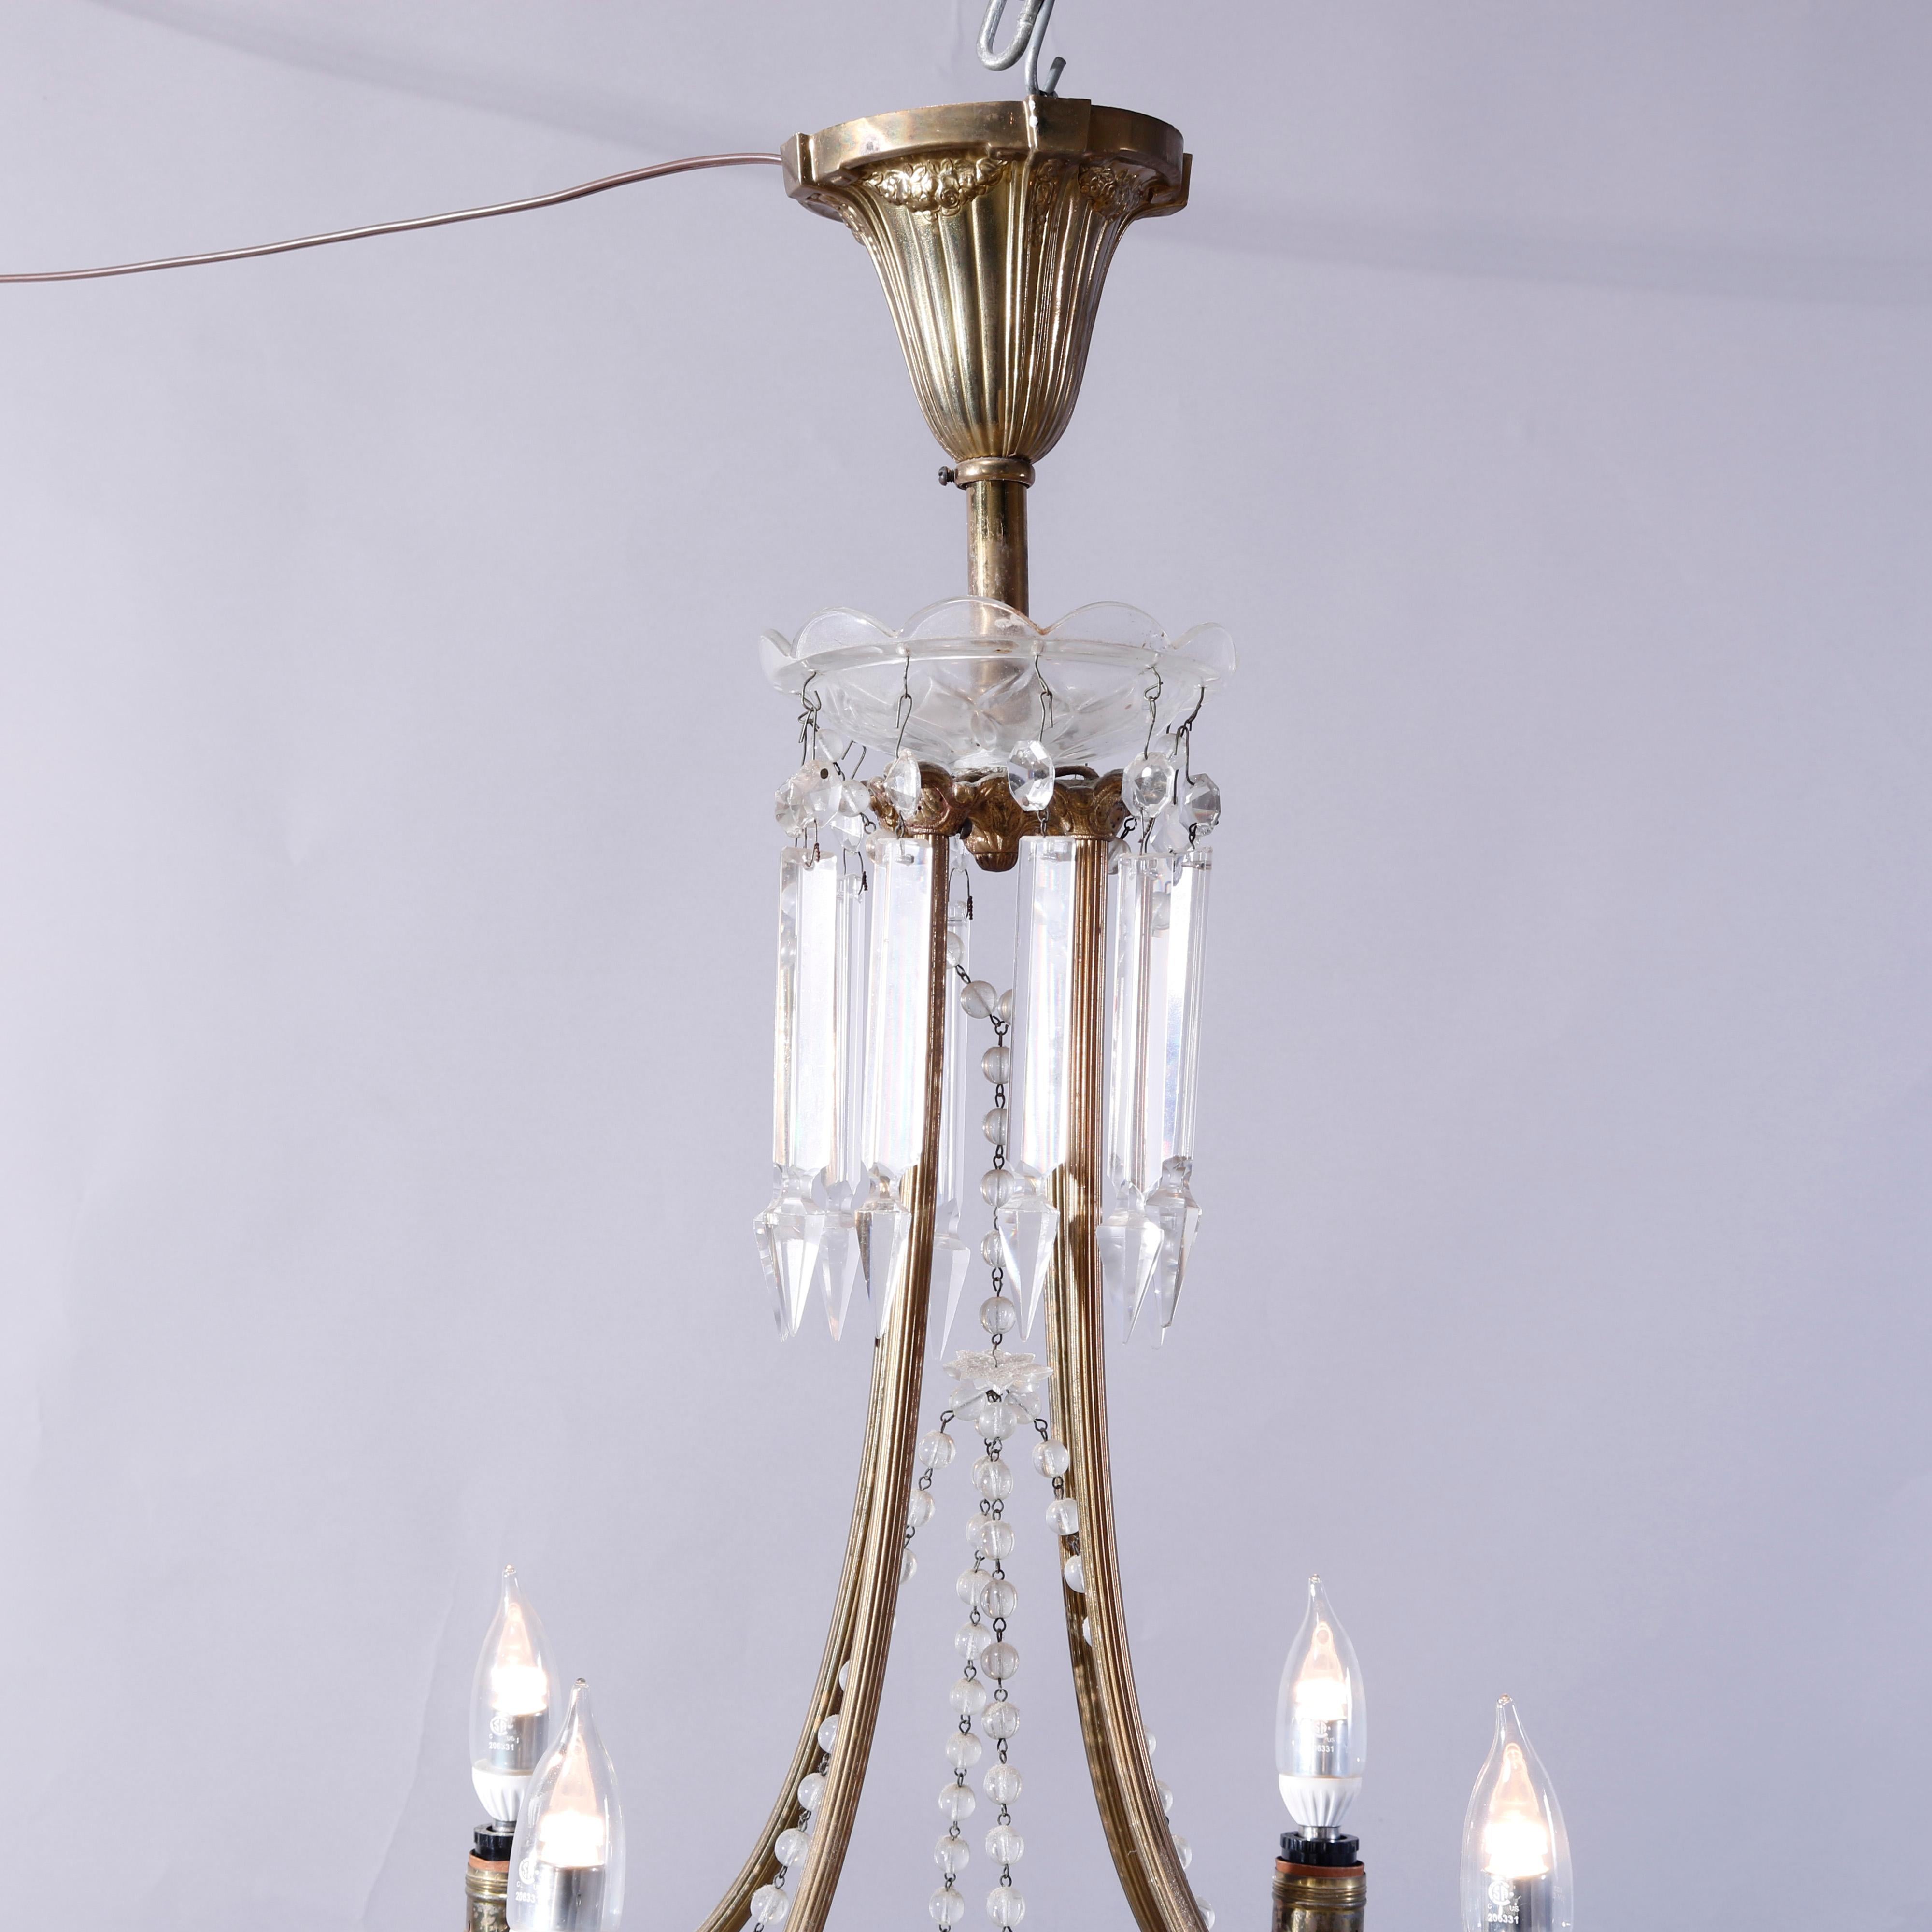 Metal Antique French Style Bronzed Four-Light Chandelier with Draped Crystals, c1920 For Sale